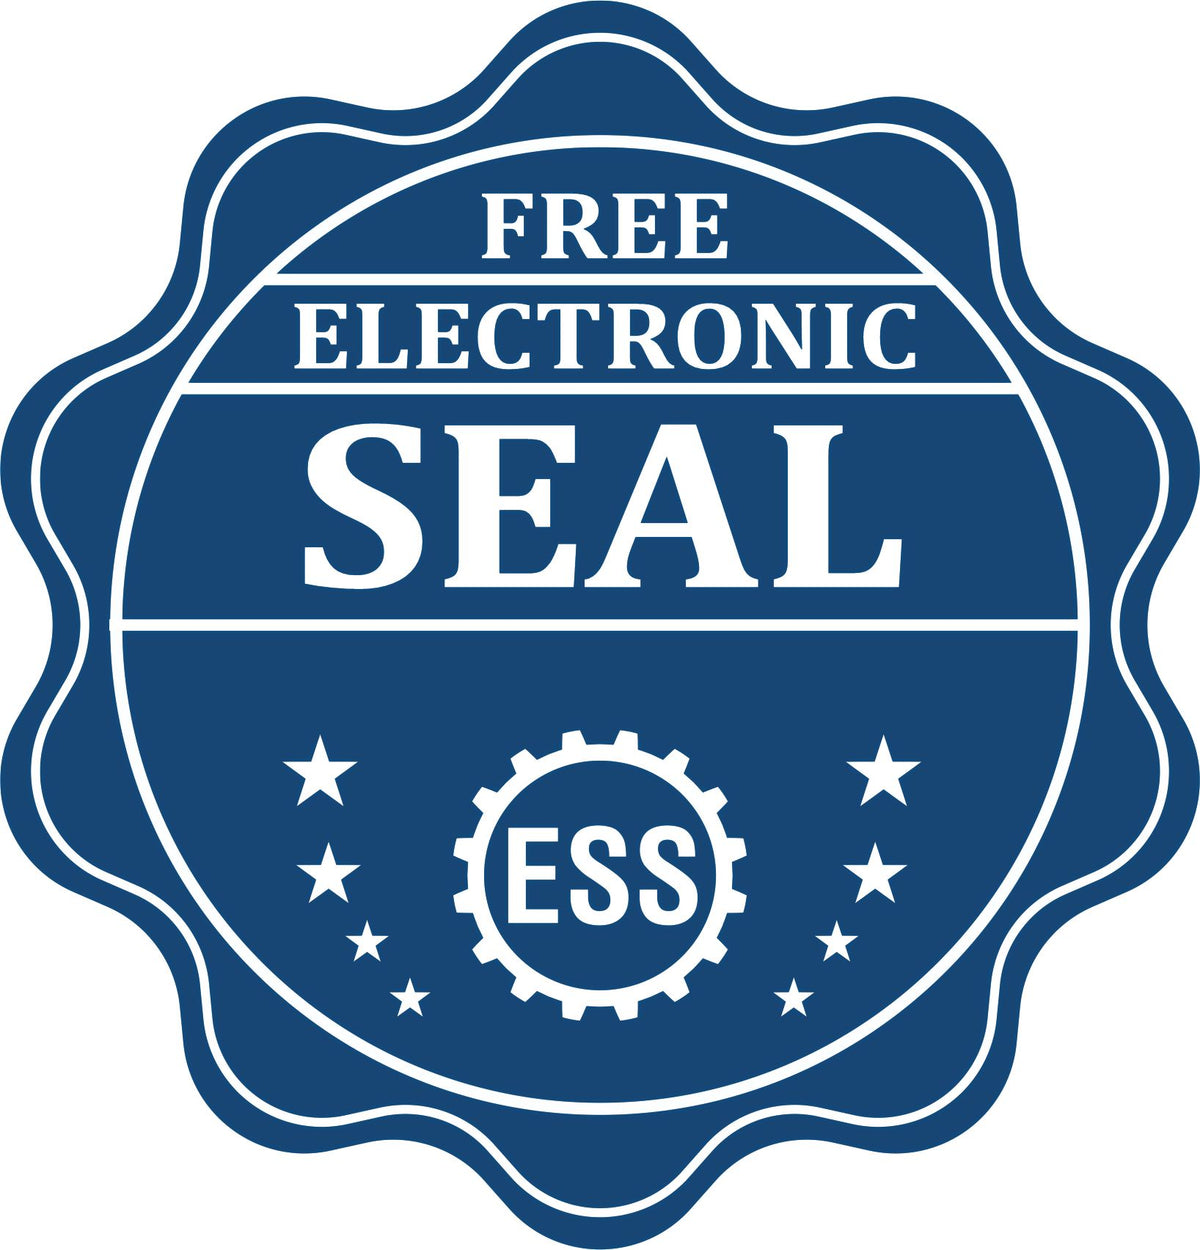 A badge showing a free electronic seal for the Premium MaxLight Pre-Inked District of Columbia Geology Stamp with stars and the ESS gear on the emblem.